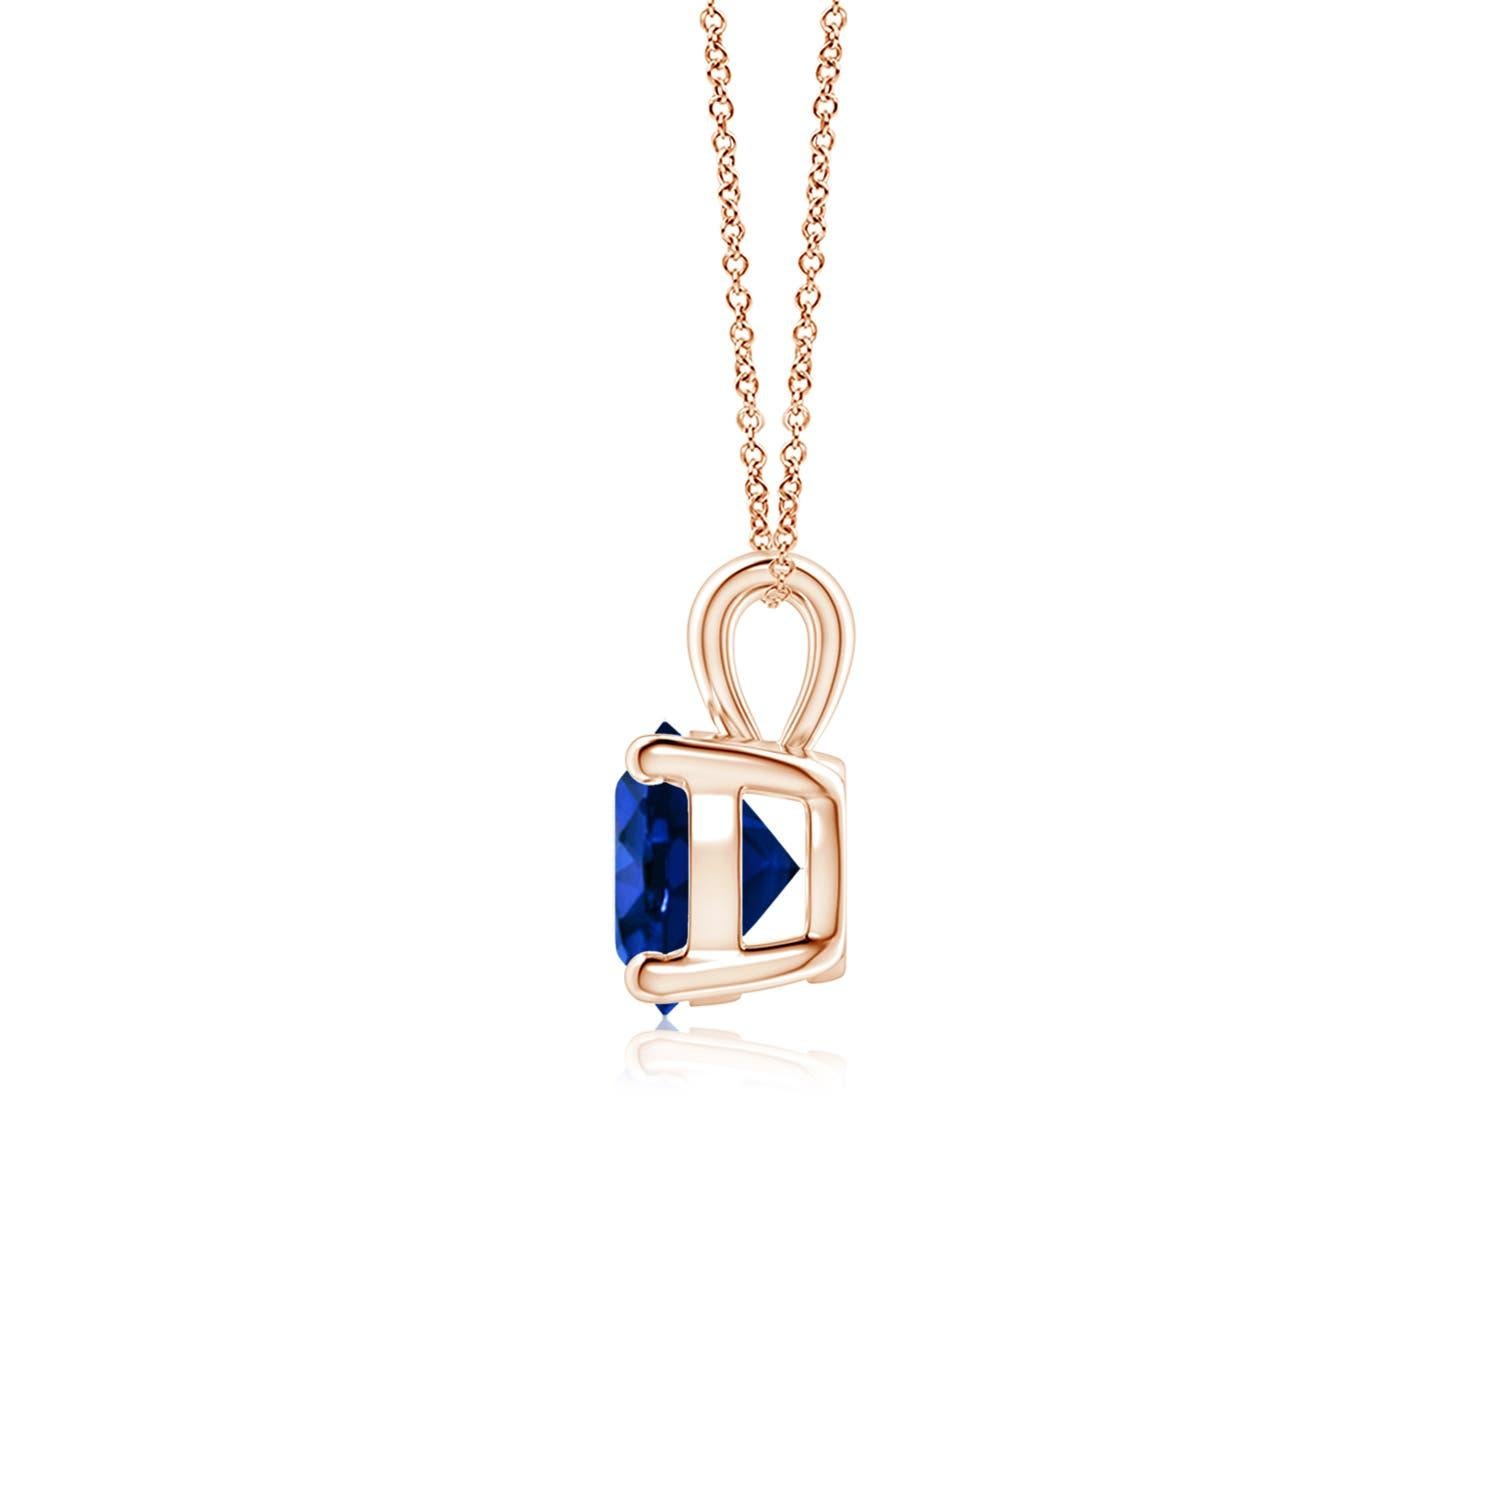 Linked to a lustrous bale is a stunning sapphire solitaire secured in a four prong setting. Crafted in 14k rose gold, the elegant design of this classic sapphire pendant draws all attention towards the magnificence of the center stone.
Blue Sapphire